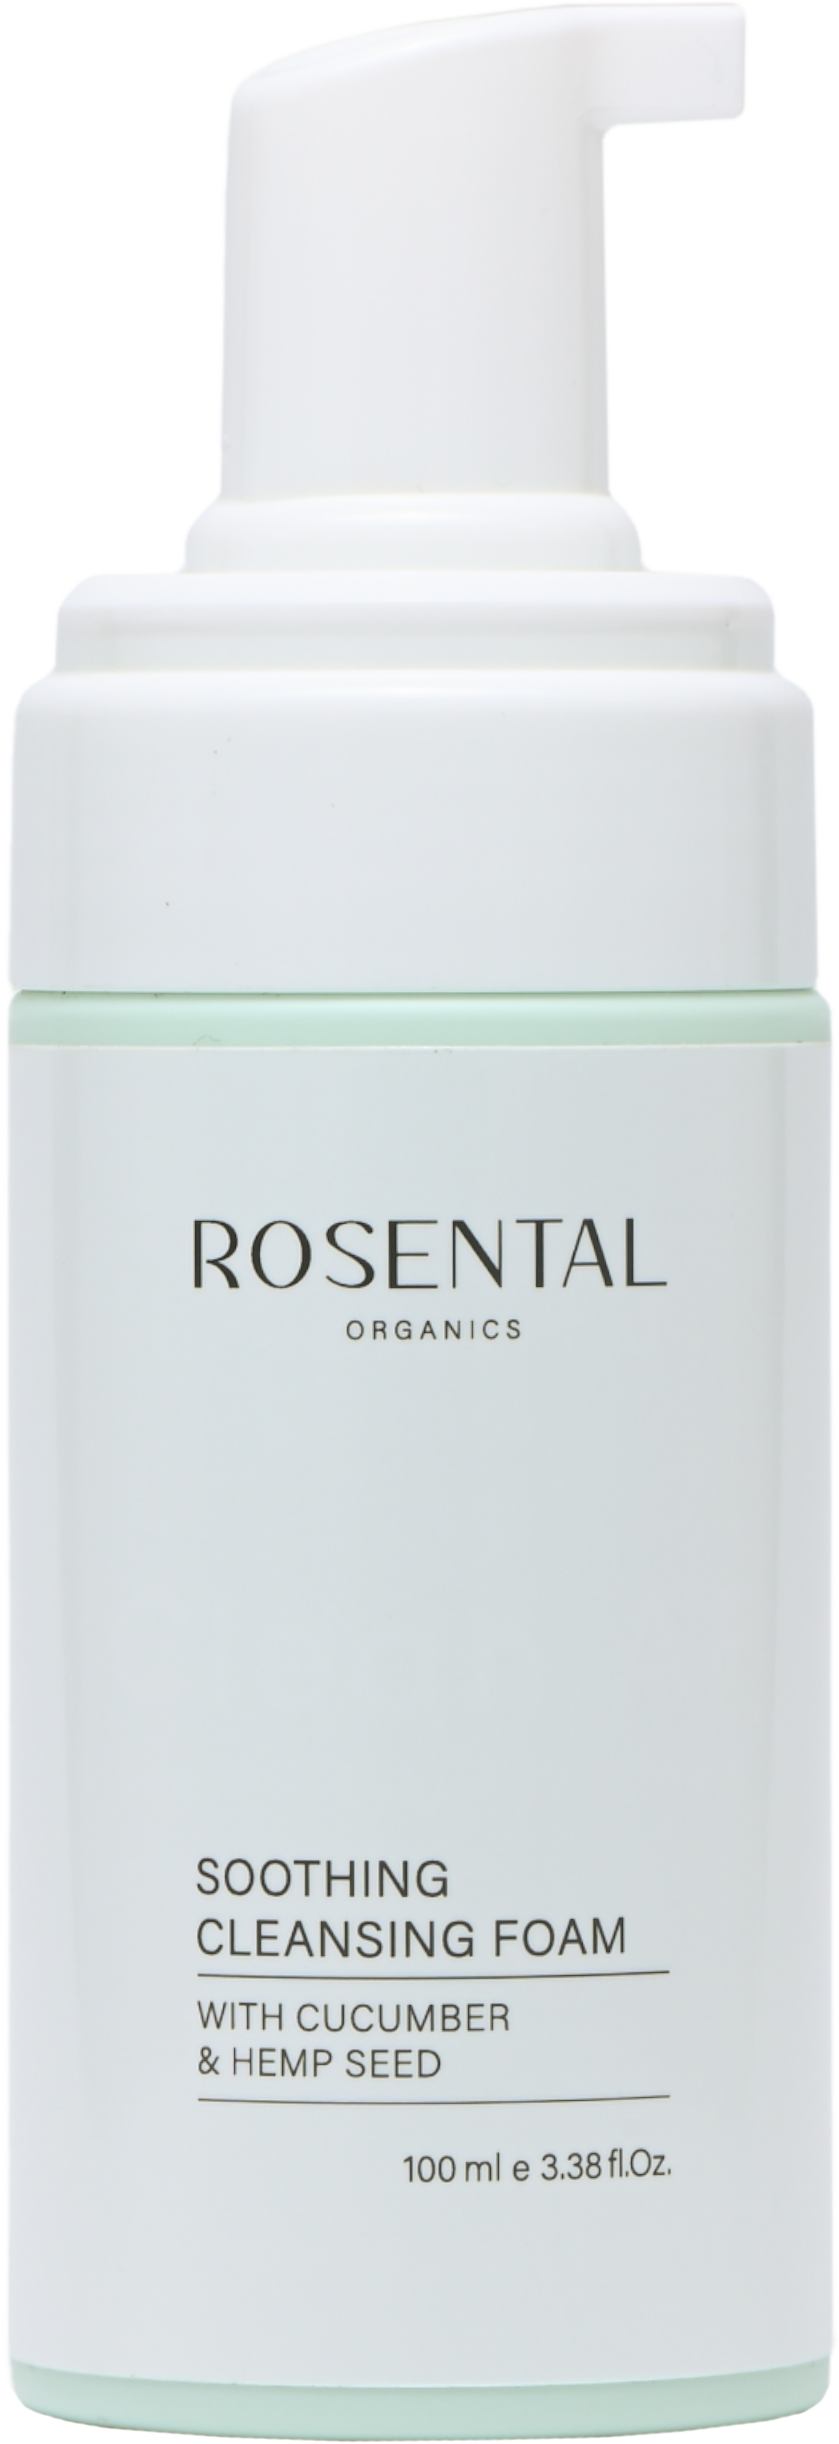 ROSENTAL Soothing Cleansing Foam | with Cucumber and Hemp Seed